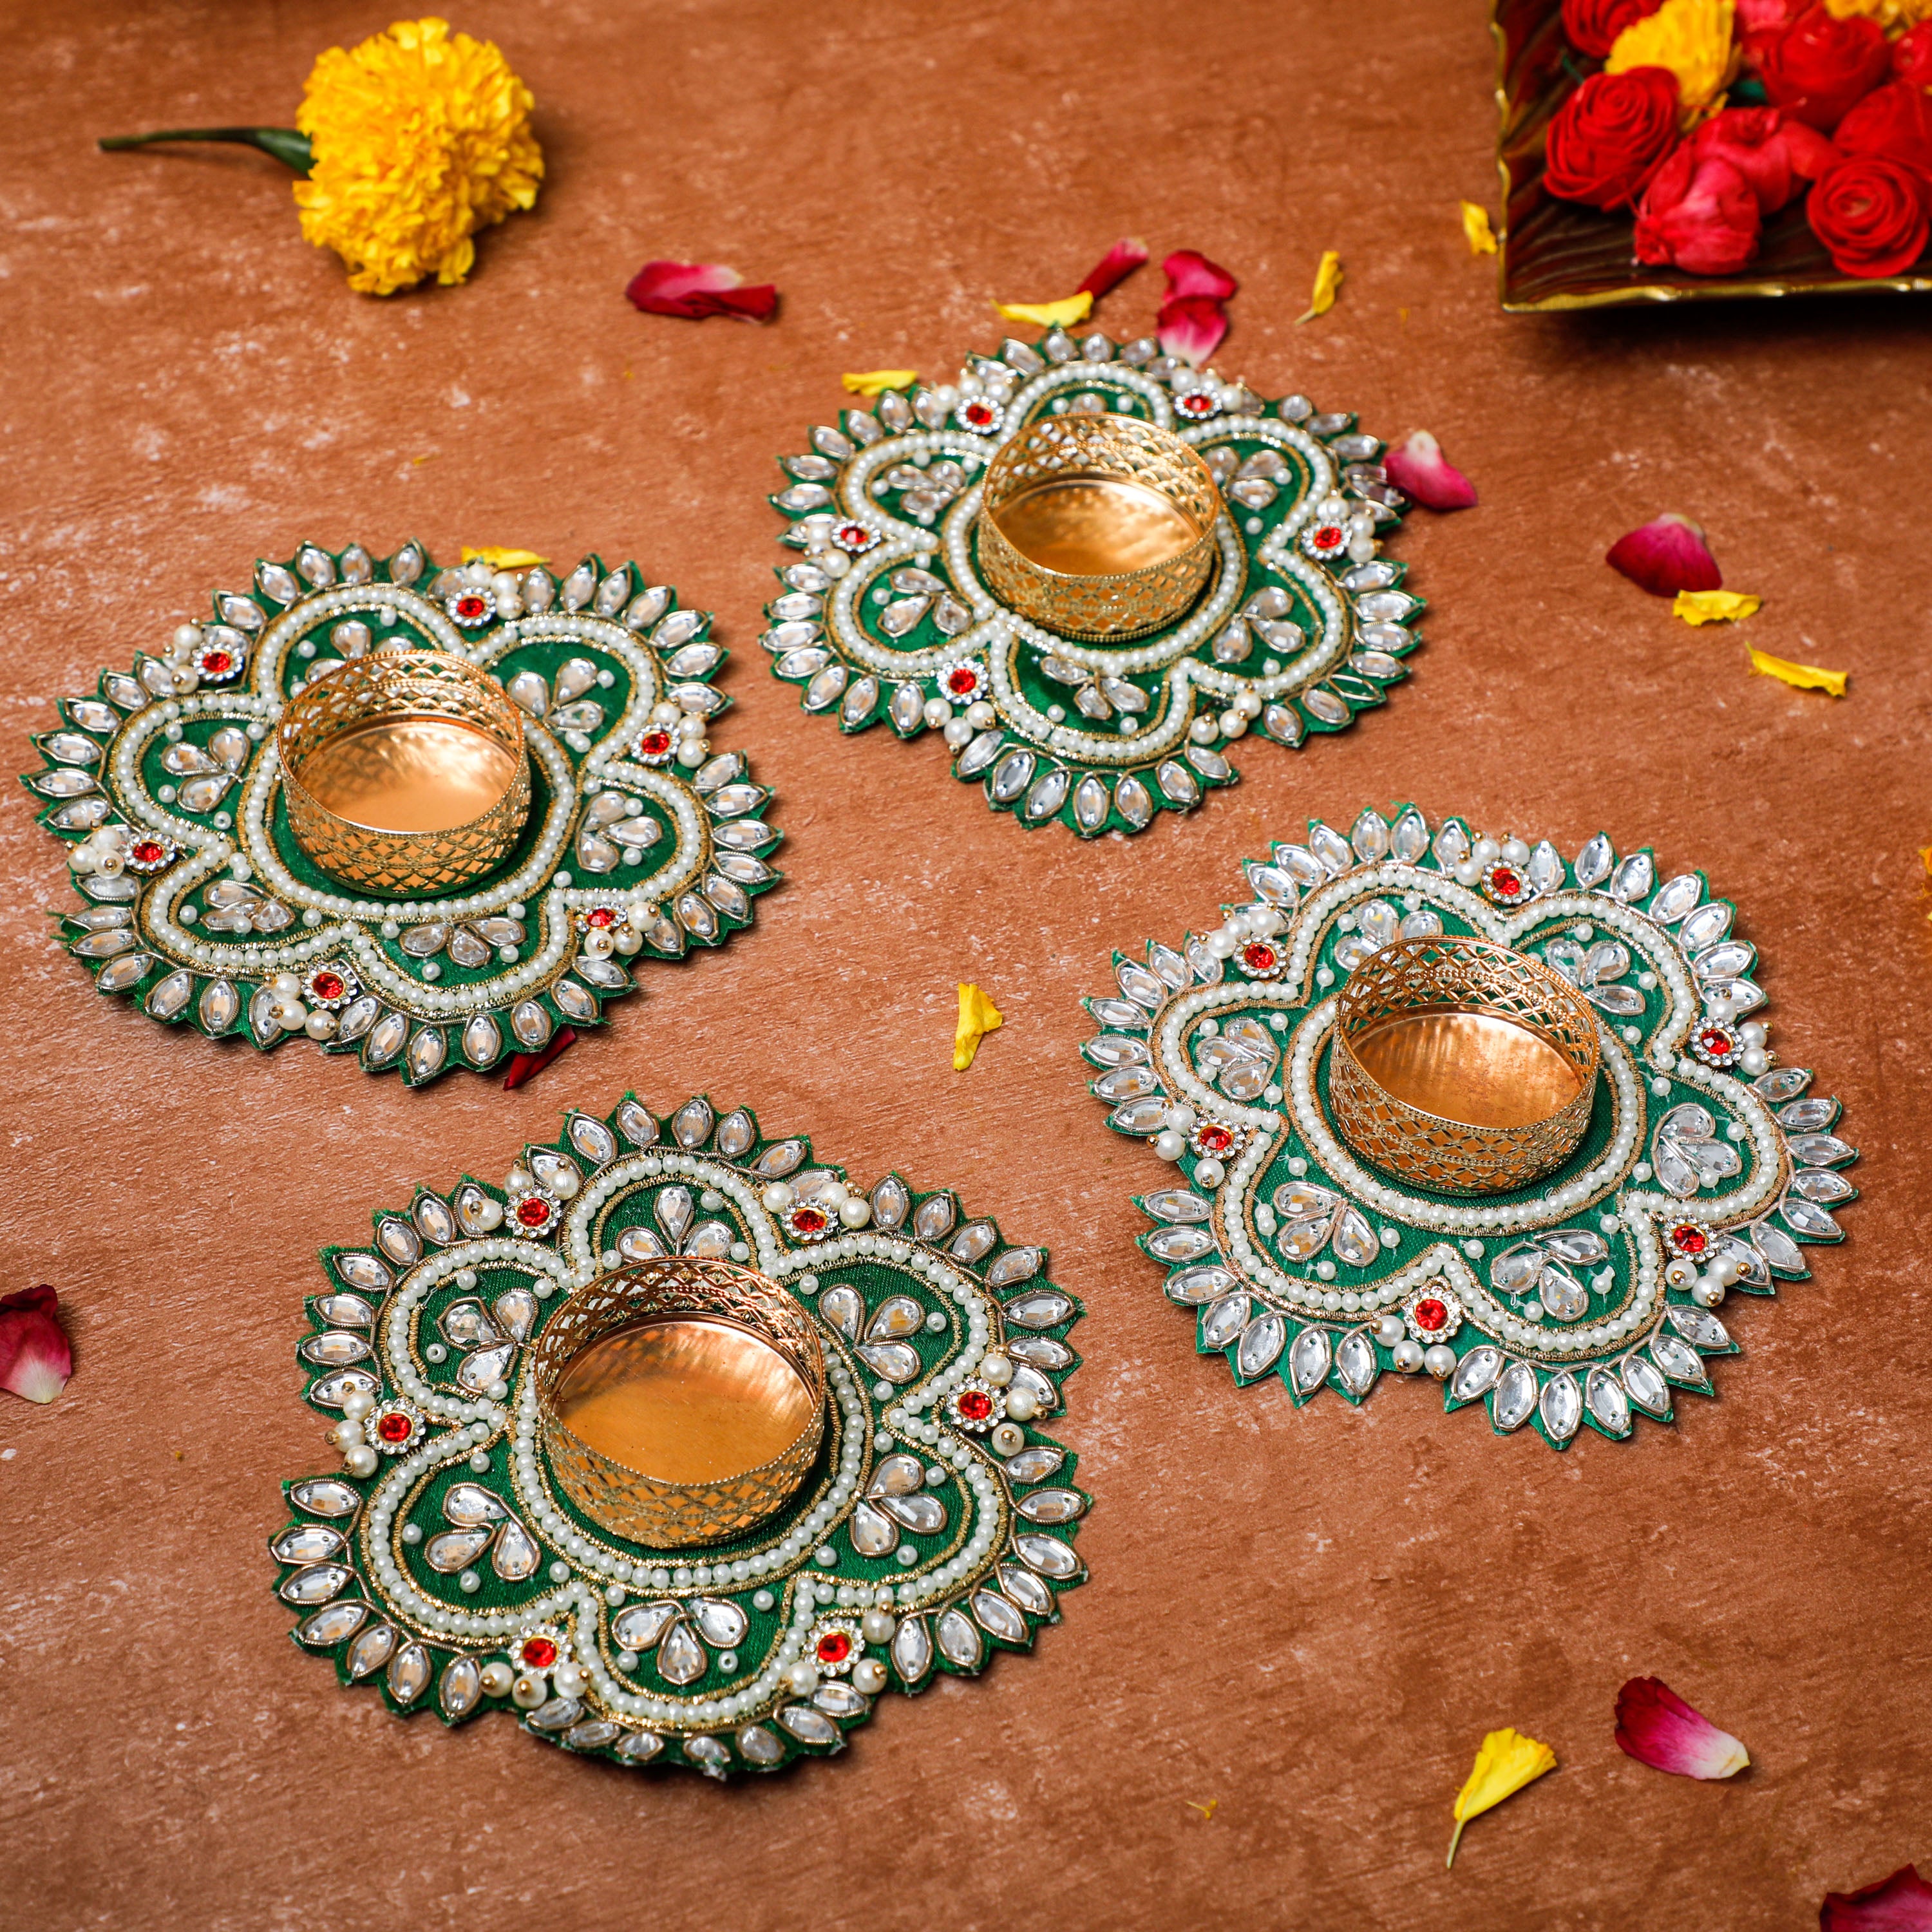 decorative diyas are available in mutlicolor